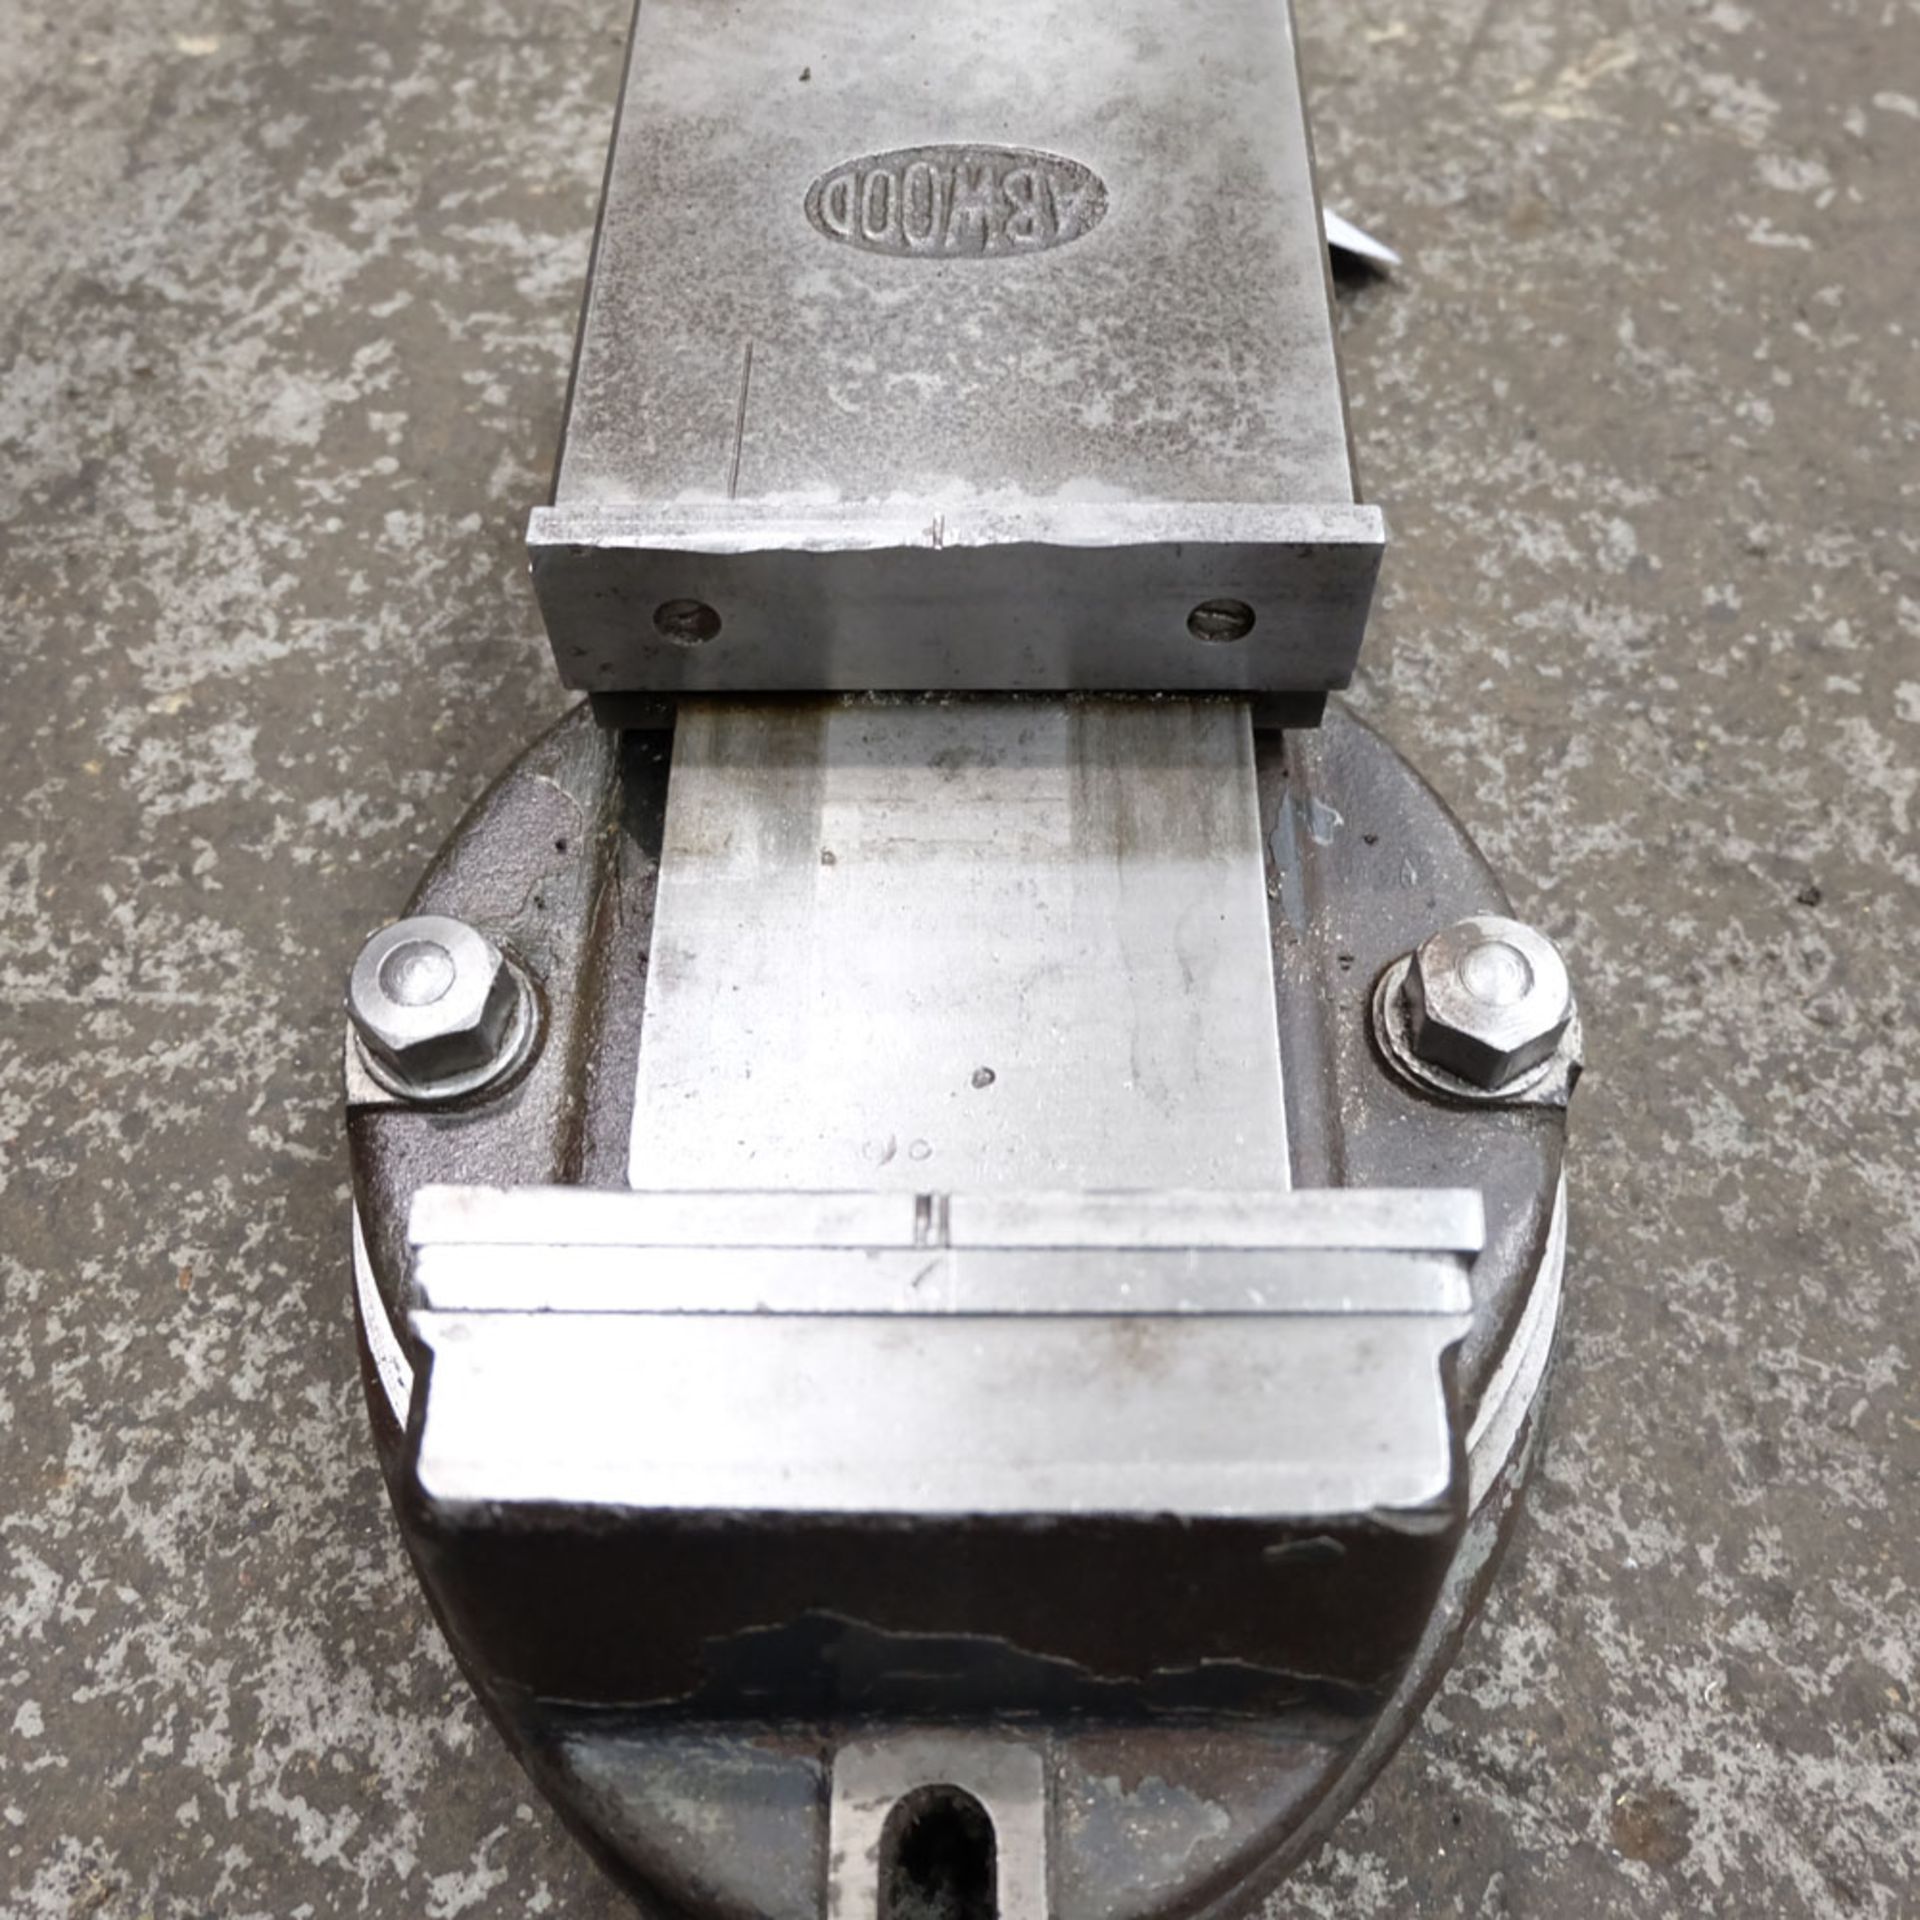 ABWOOD Swivelling Machine Vice. Approx Measurements - Jaws 6 1/4". Max Opening 5". - Image 3 of 5